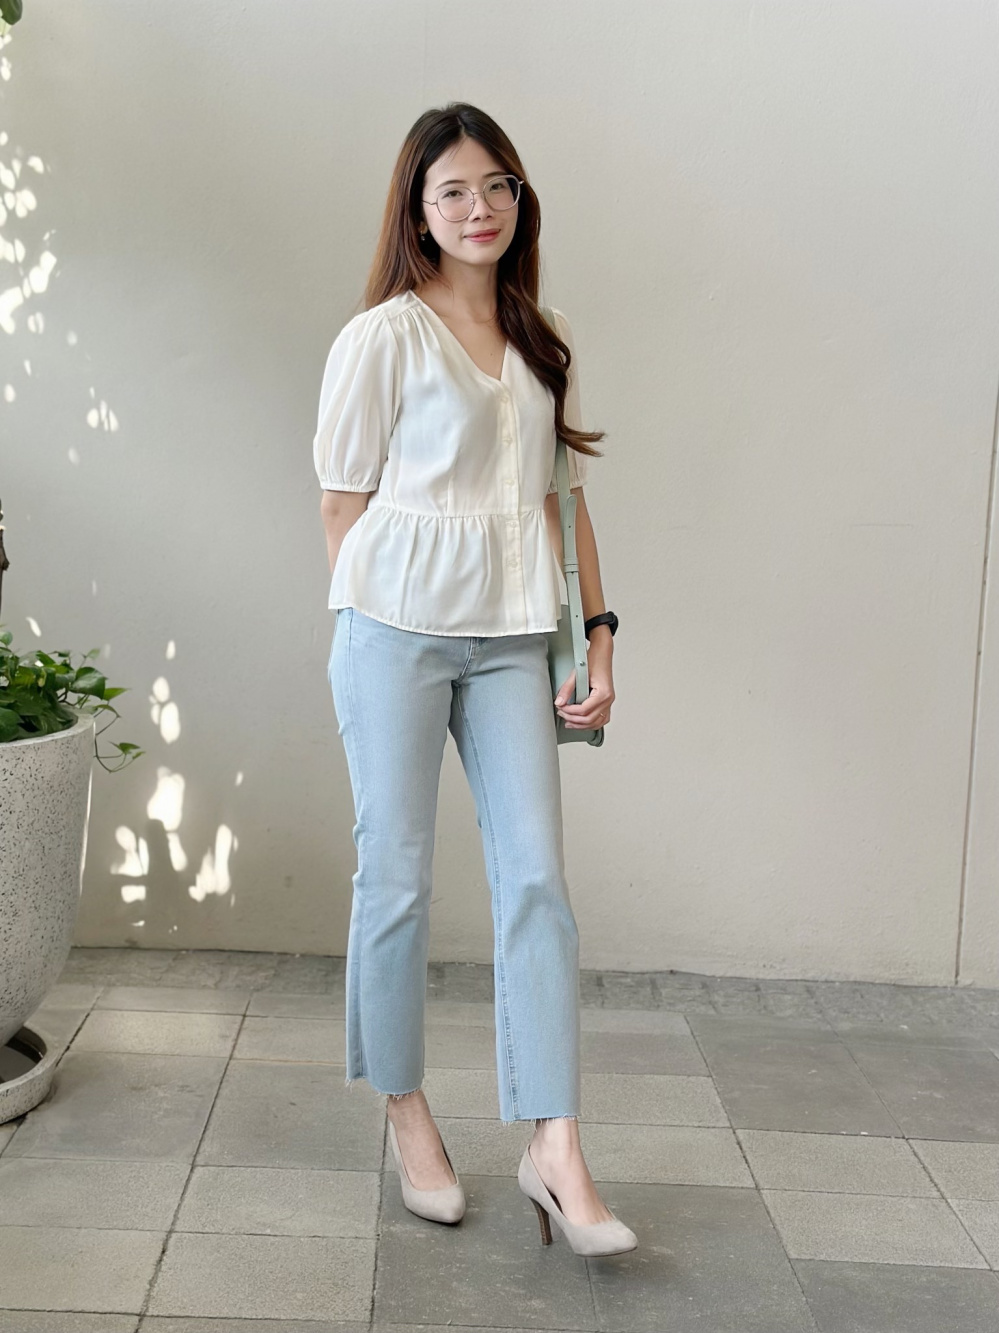 Check styling ideas for「Flared Ankle Jeans」